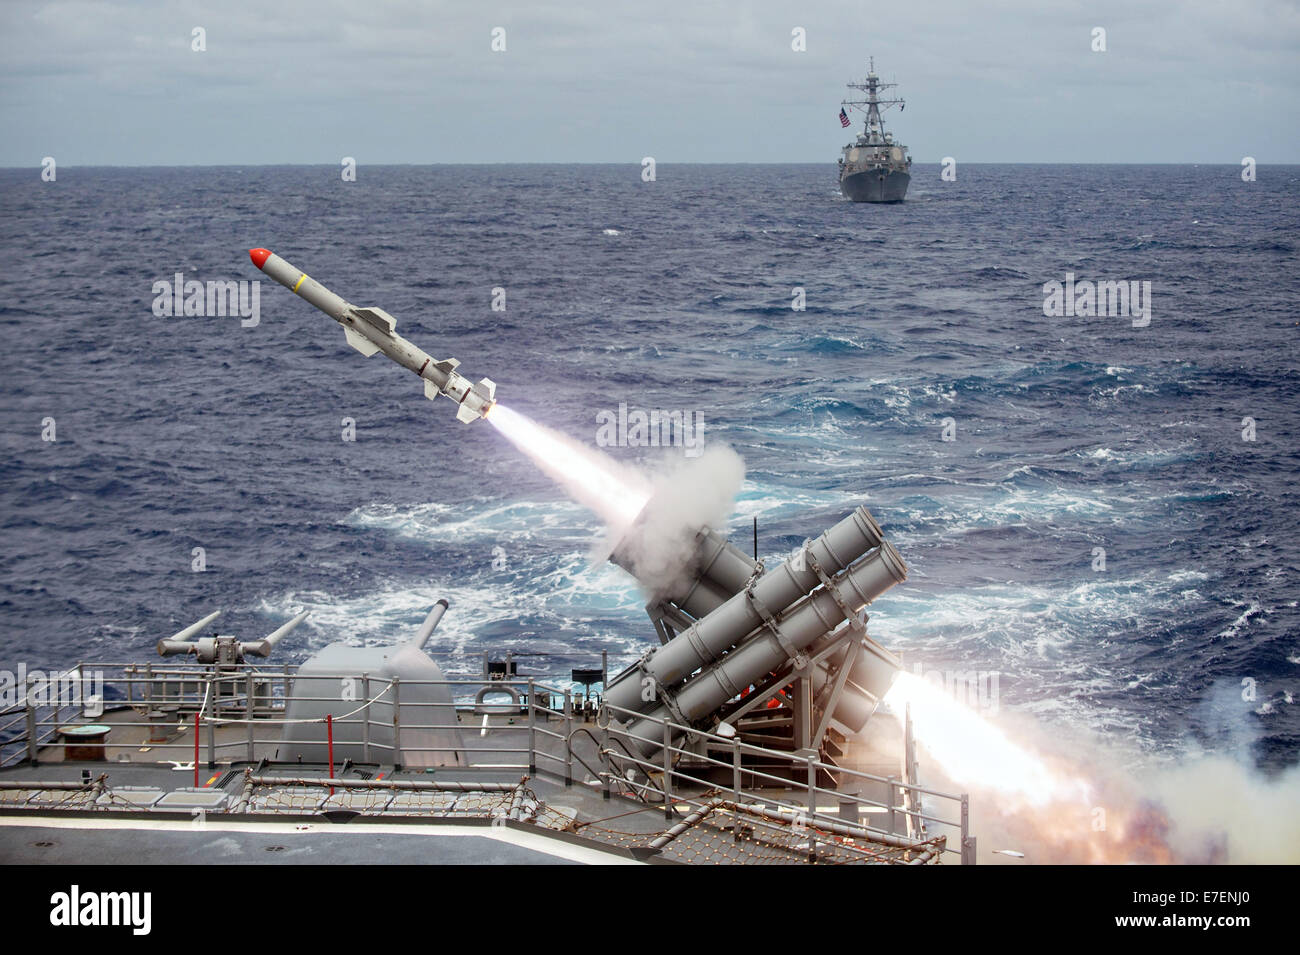 A Harpoon anti-ship missile is launched from the Ticonderoga-class guided-missile cruiser USS Shiloh during exercise Valiant Shield 2014 September 15, 2014 off the coast of Guam. Stock Photo